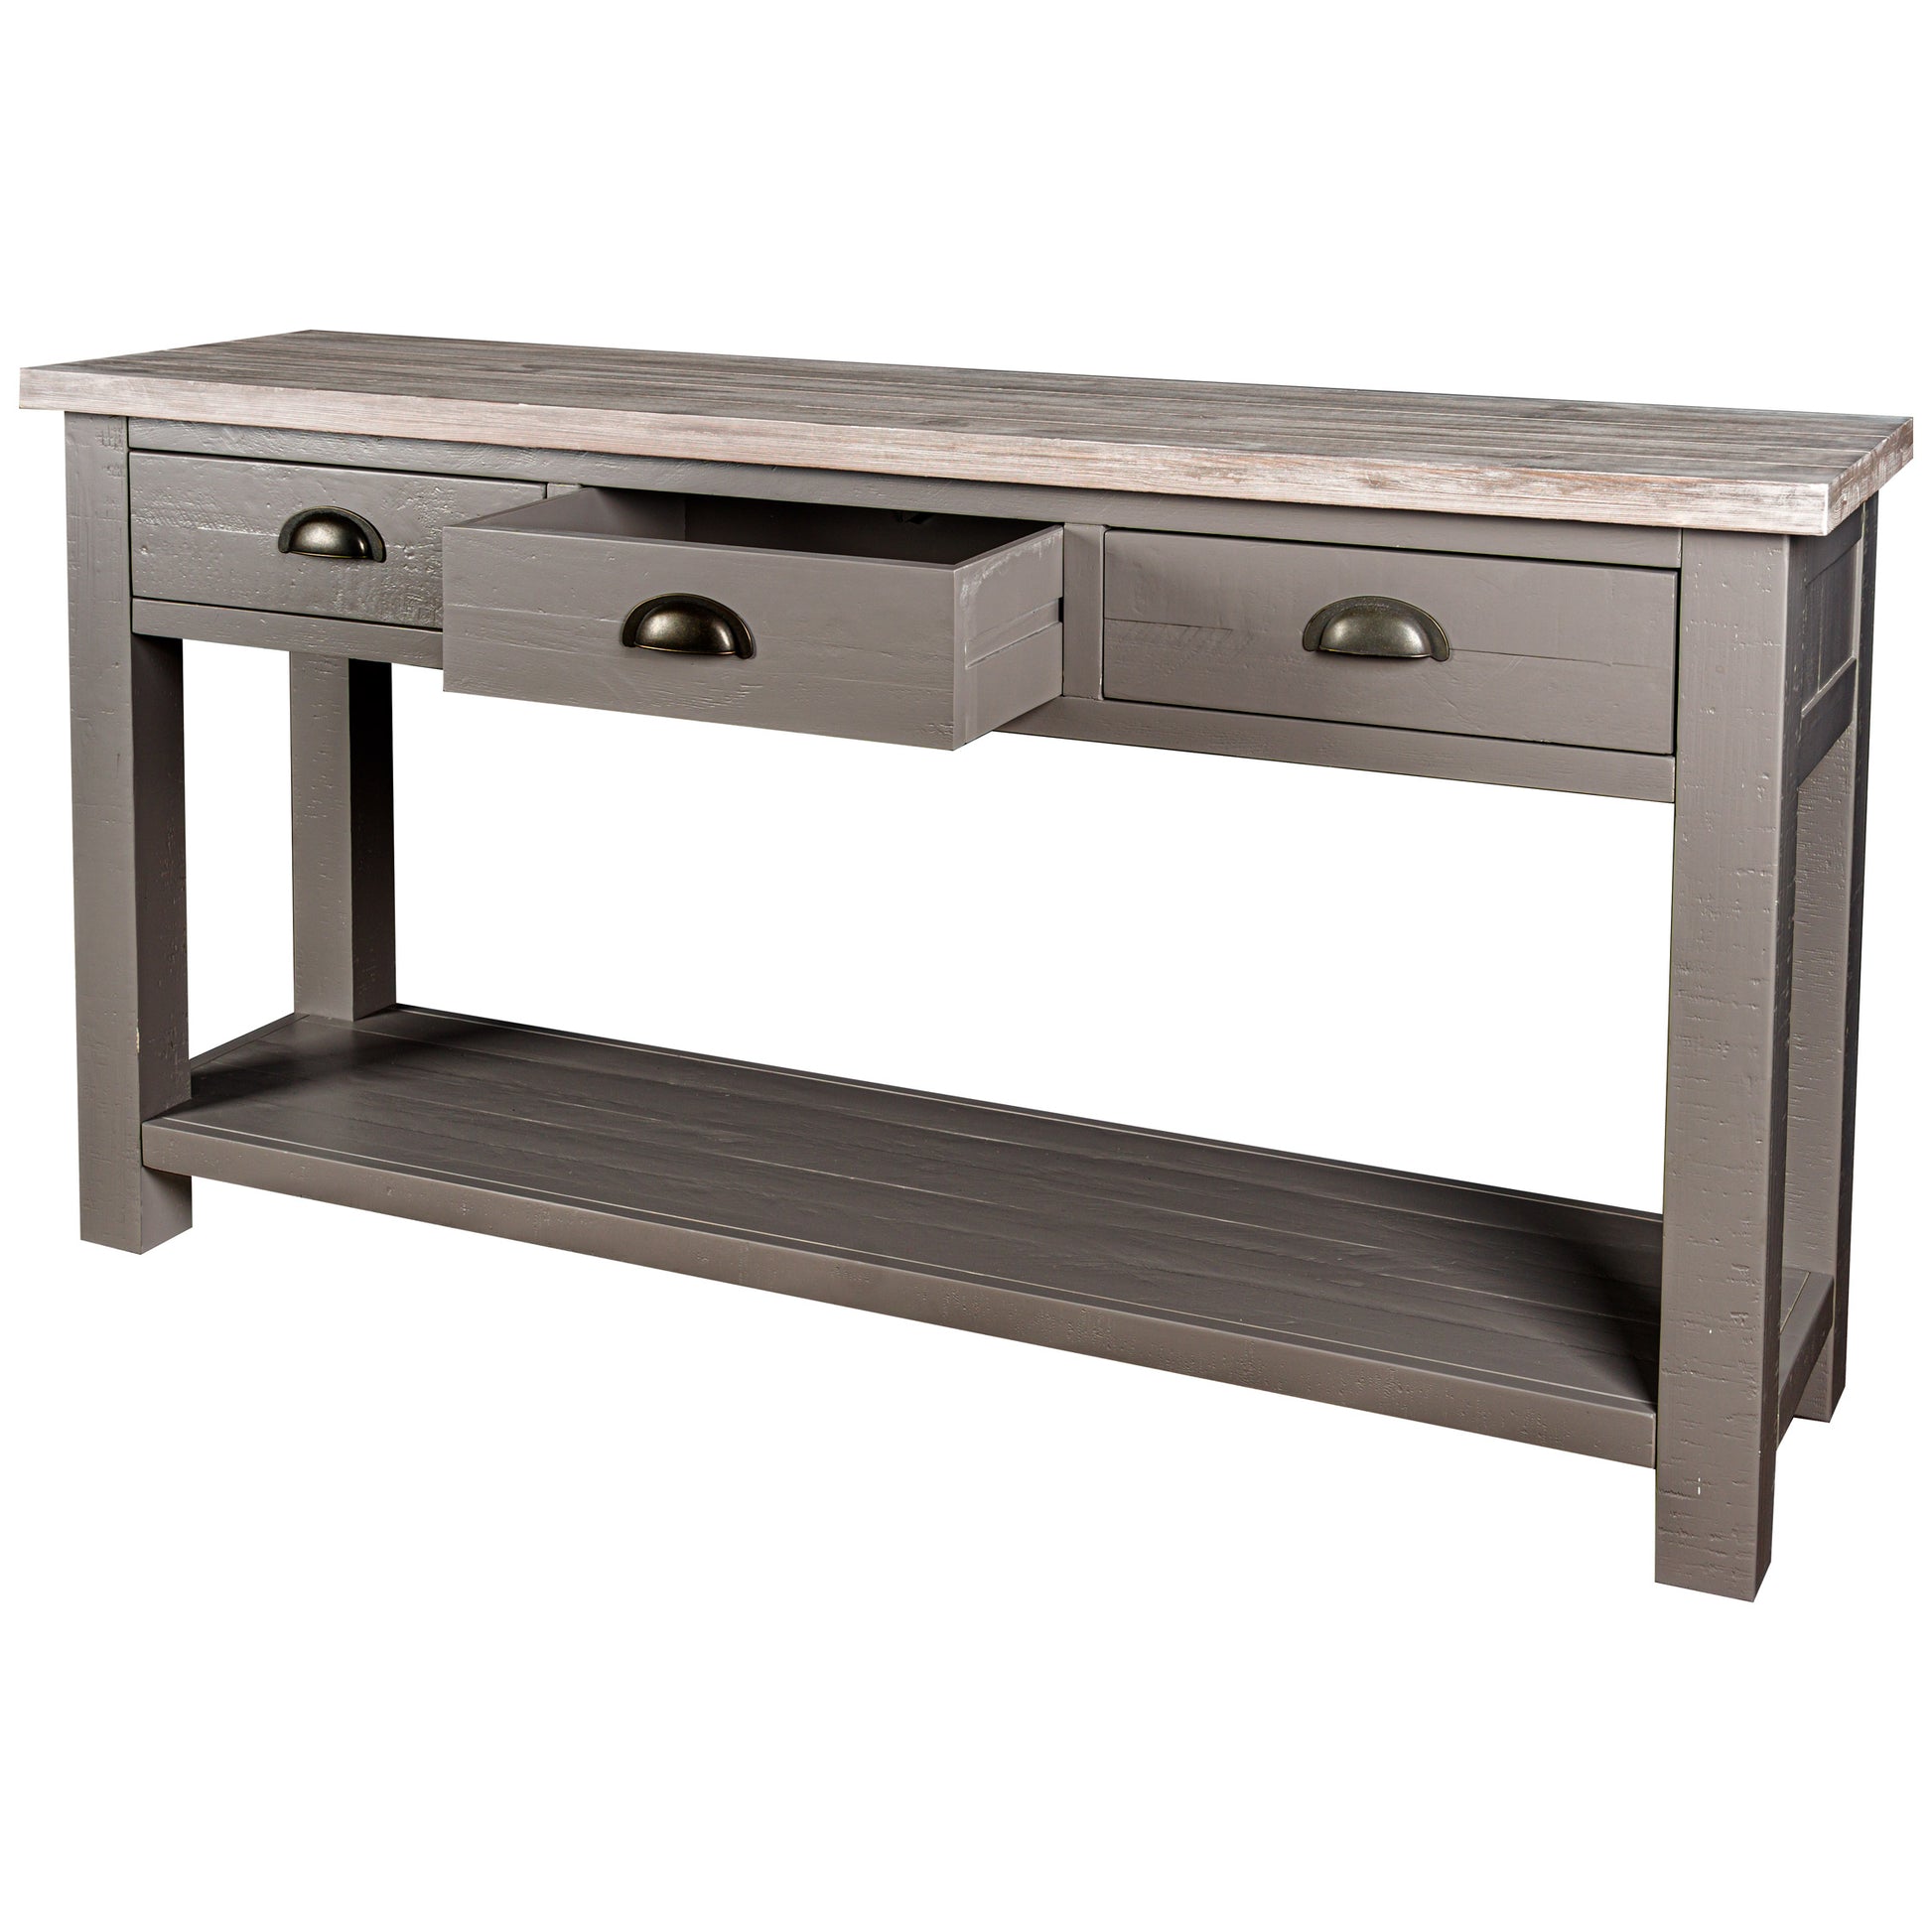 The Oxley Collection Three Drawer Console Table